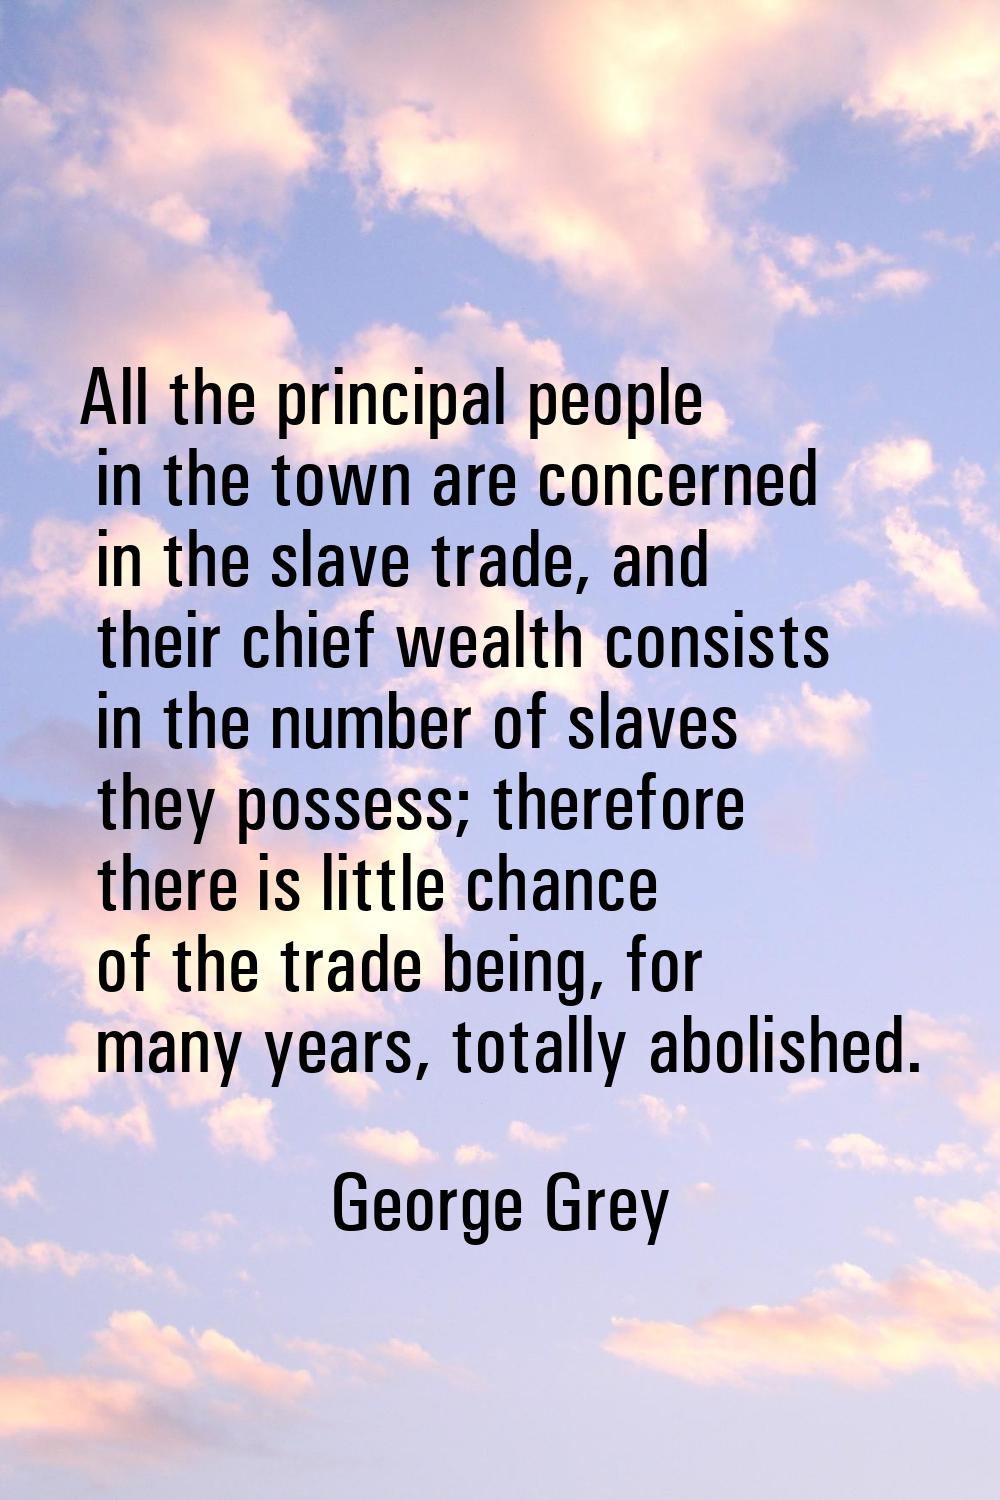 All the principal people in the town are concerned in the slave trade, and their chief wealth consi